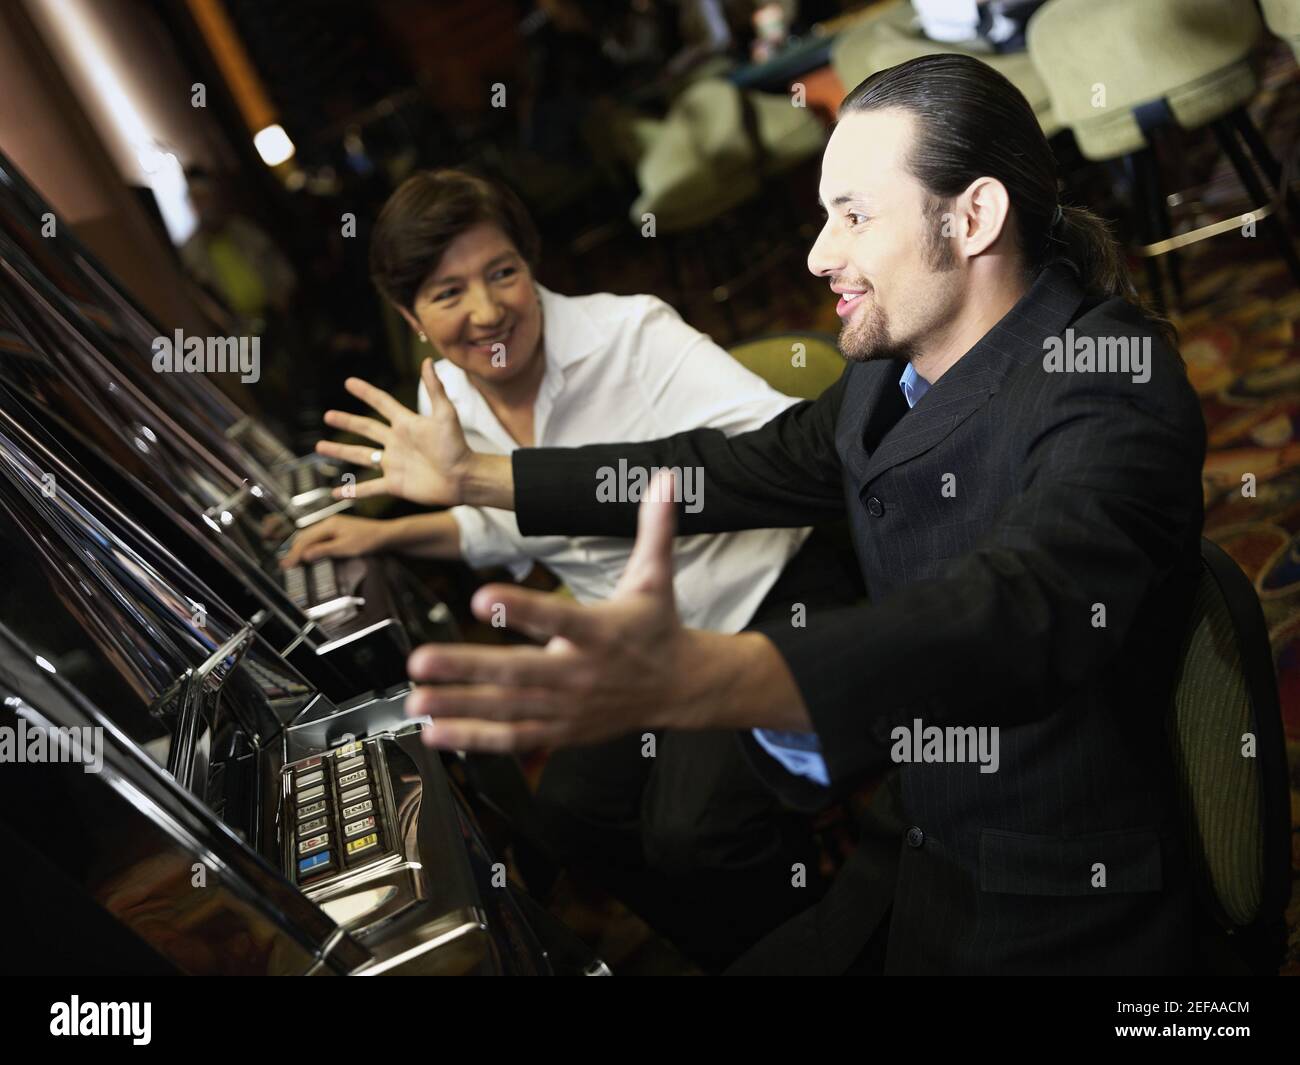 Mid adult man cheering in front of a slot machine with a mature woman smiling beside him Stock Photo